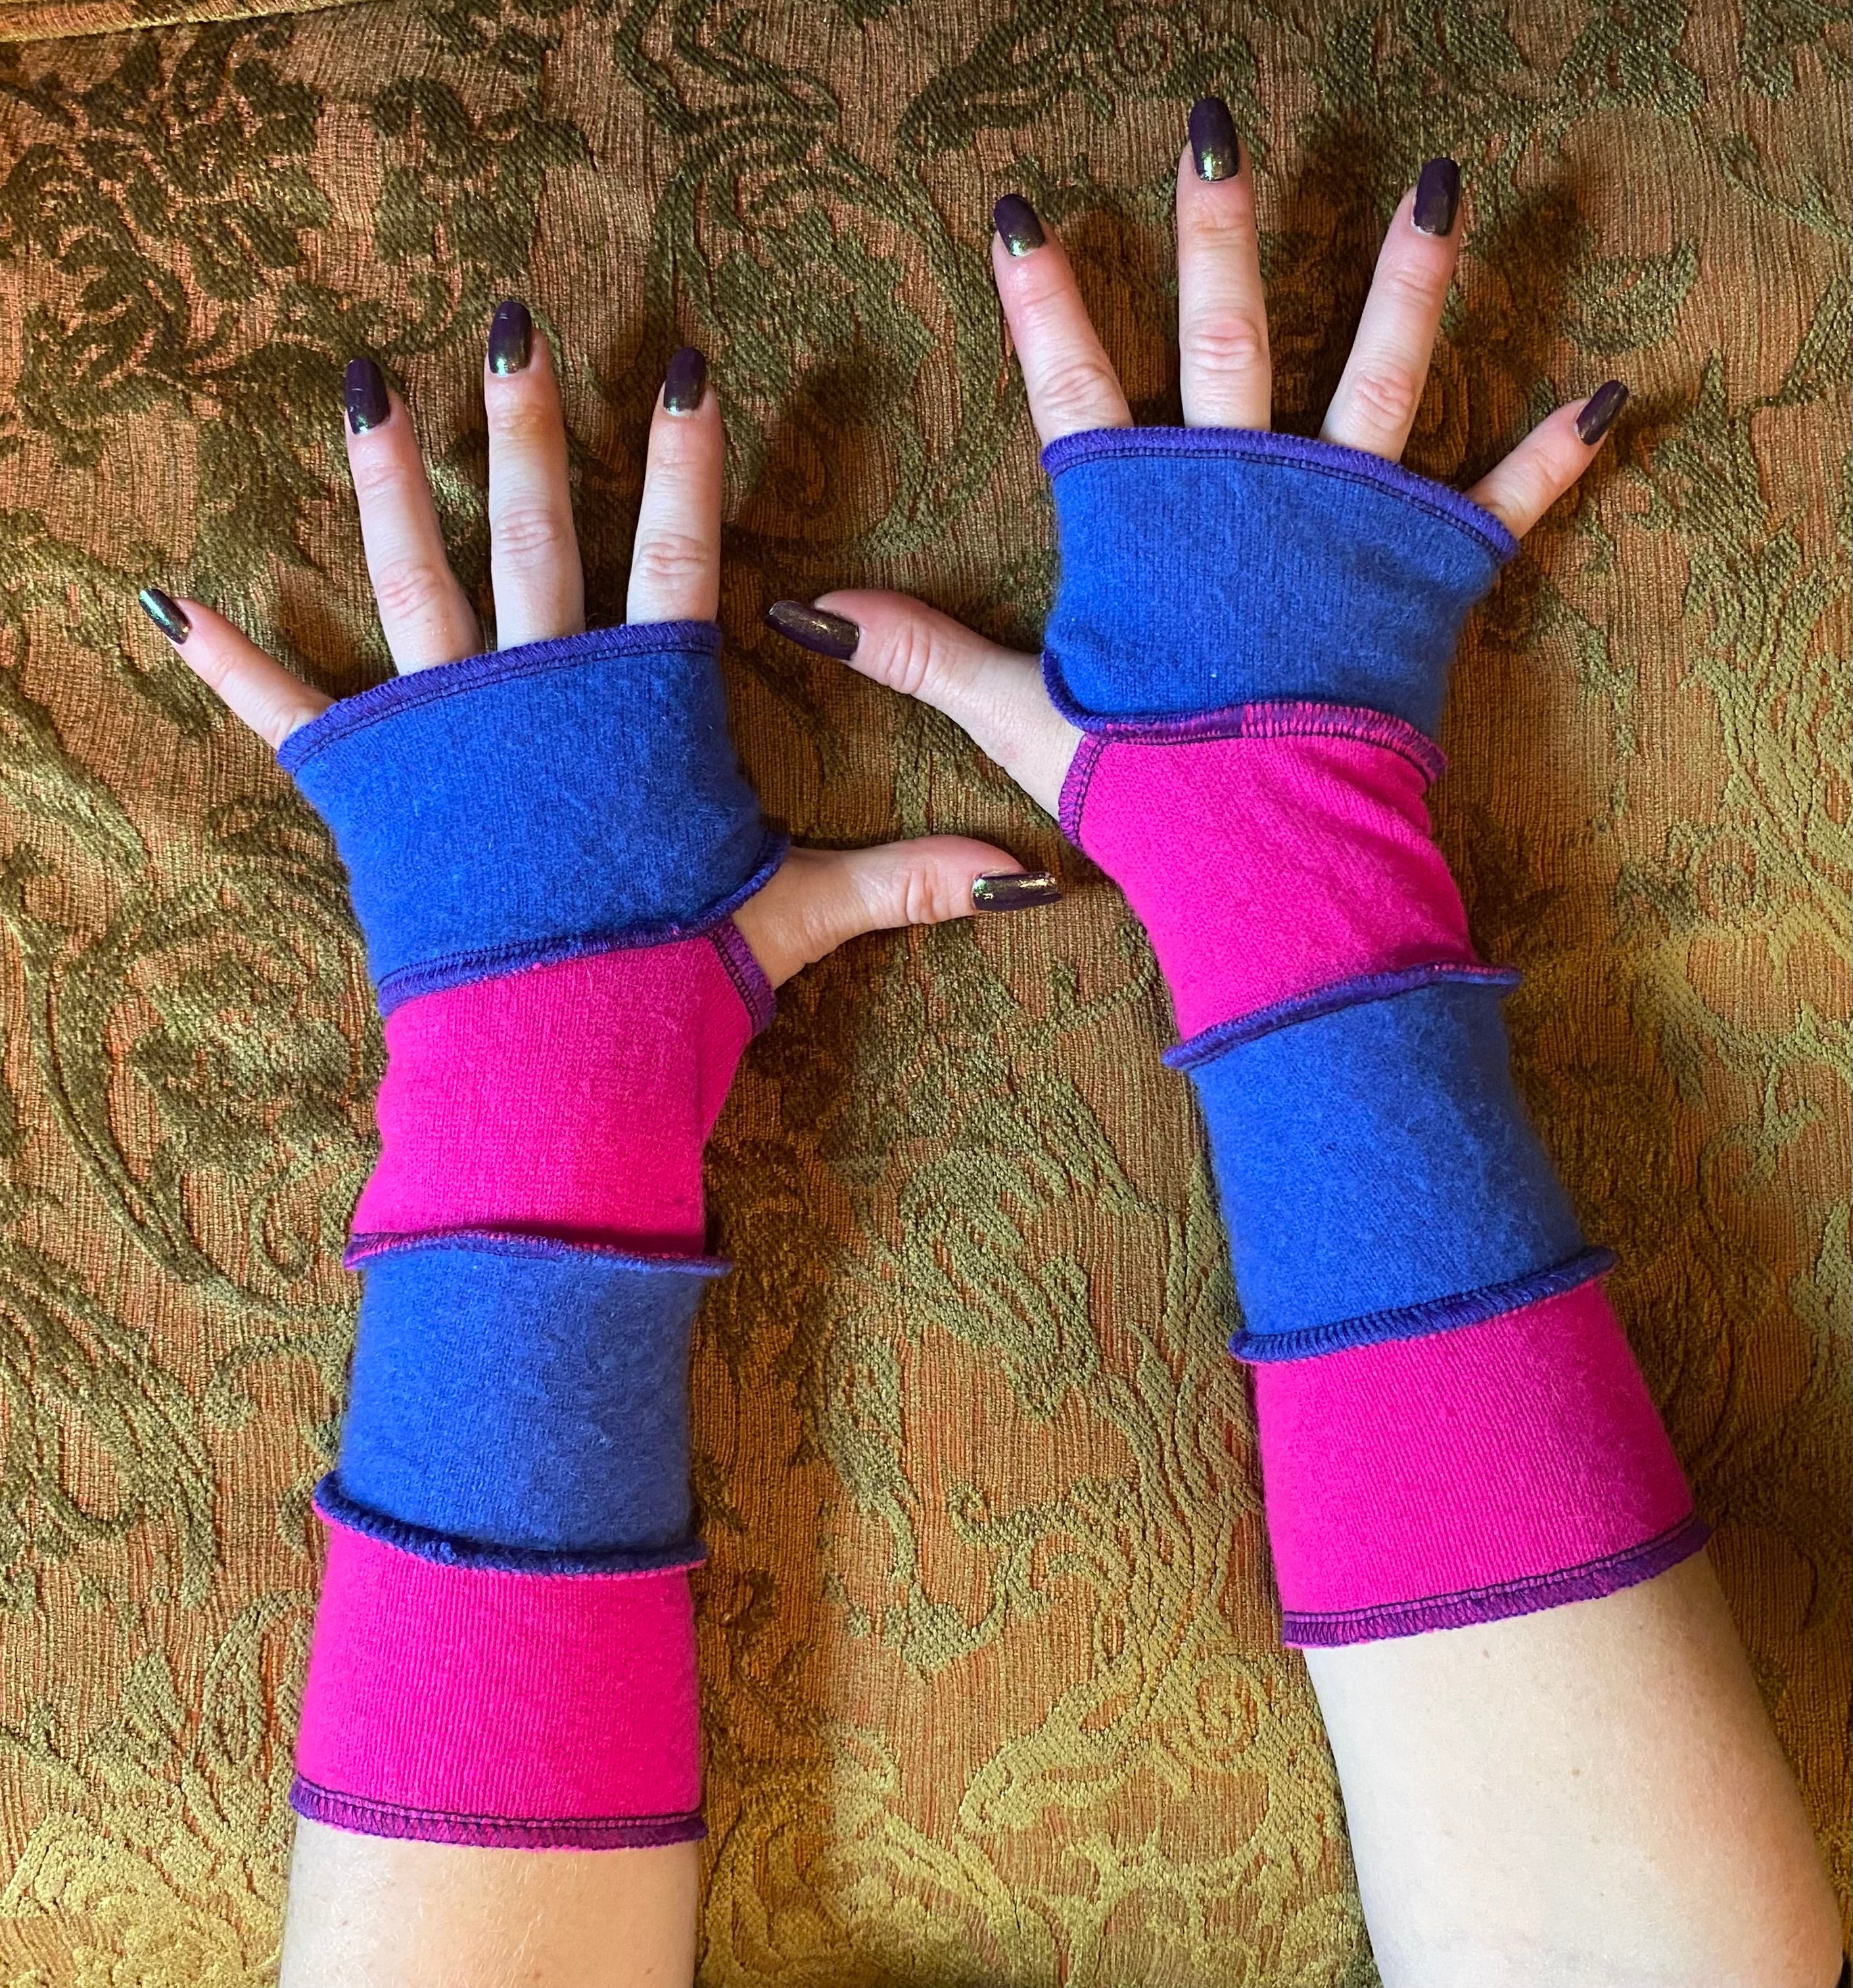 Hot pink and muted blue armwarmers